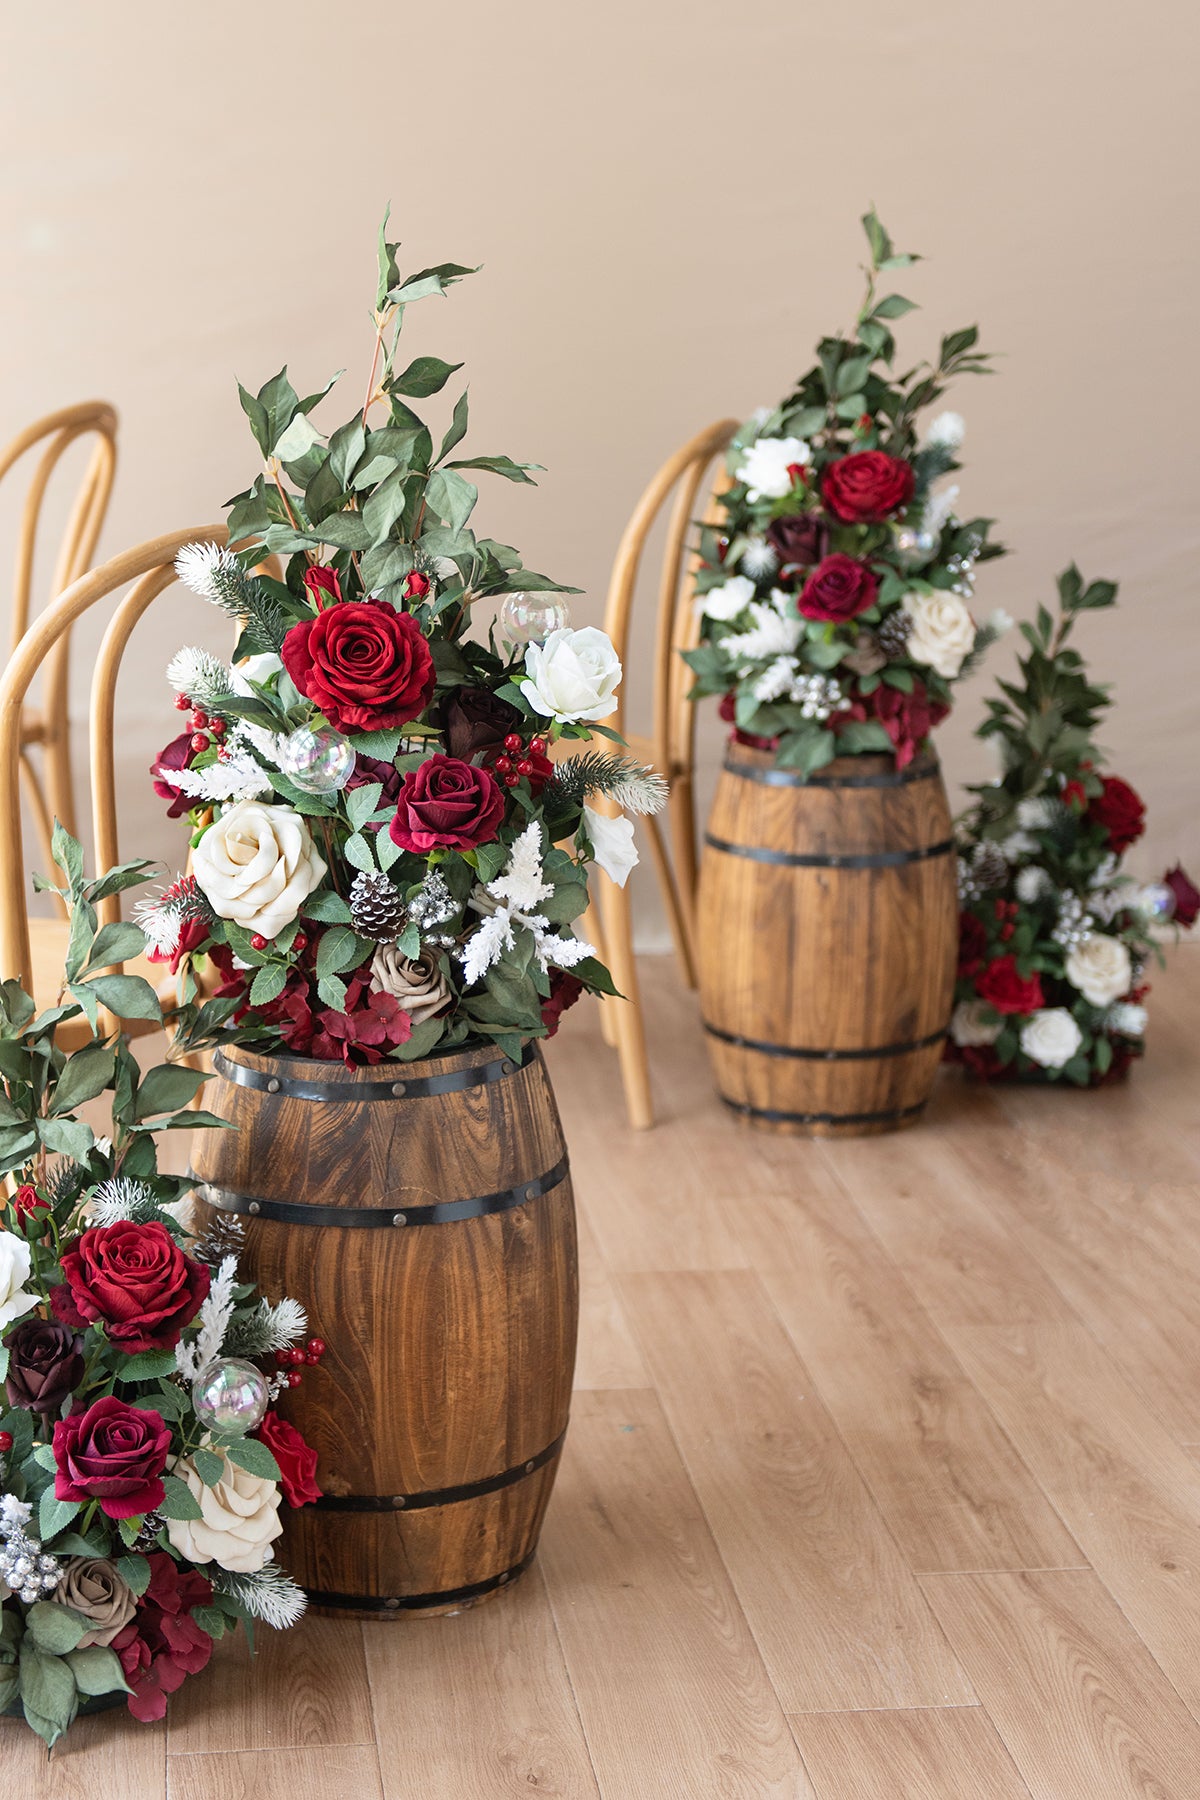 Free-Standing Flower Arrangements in Christmas Red & Sparkle